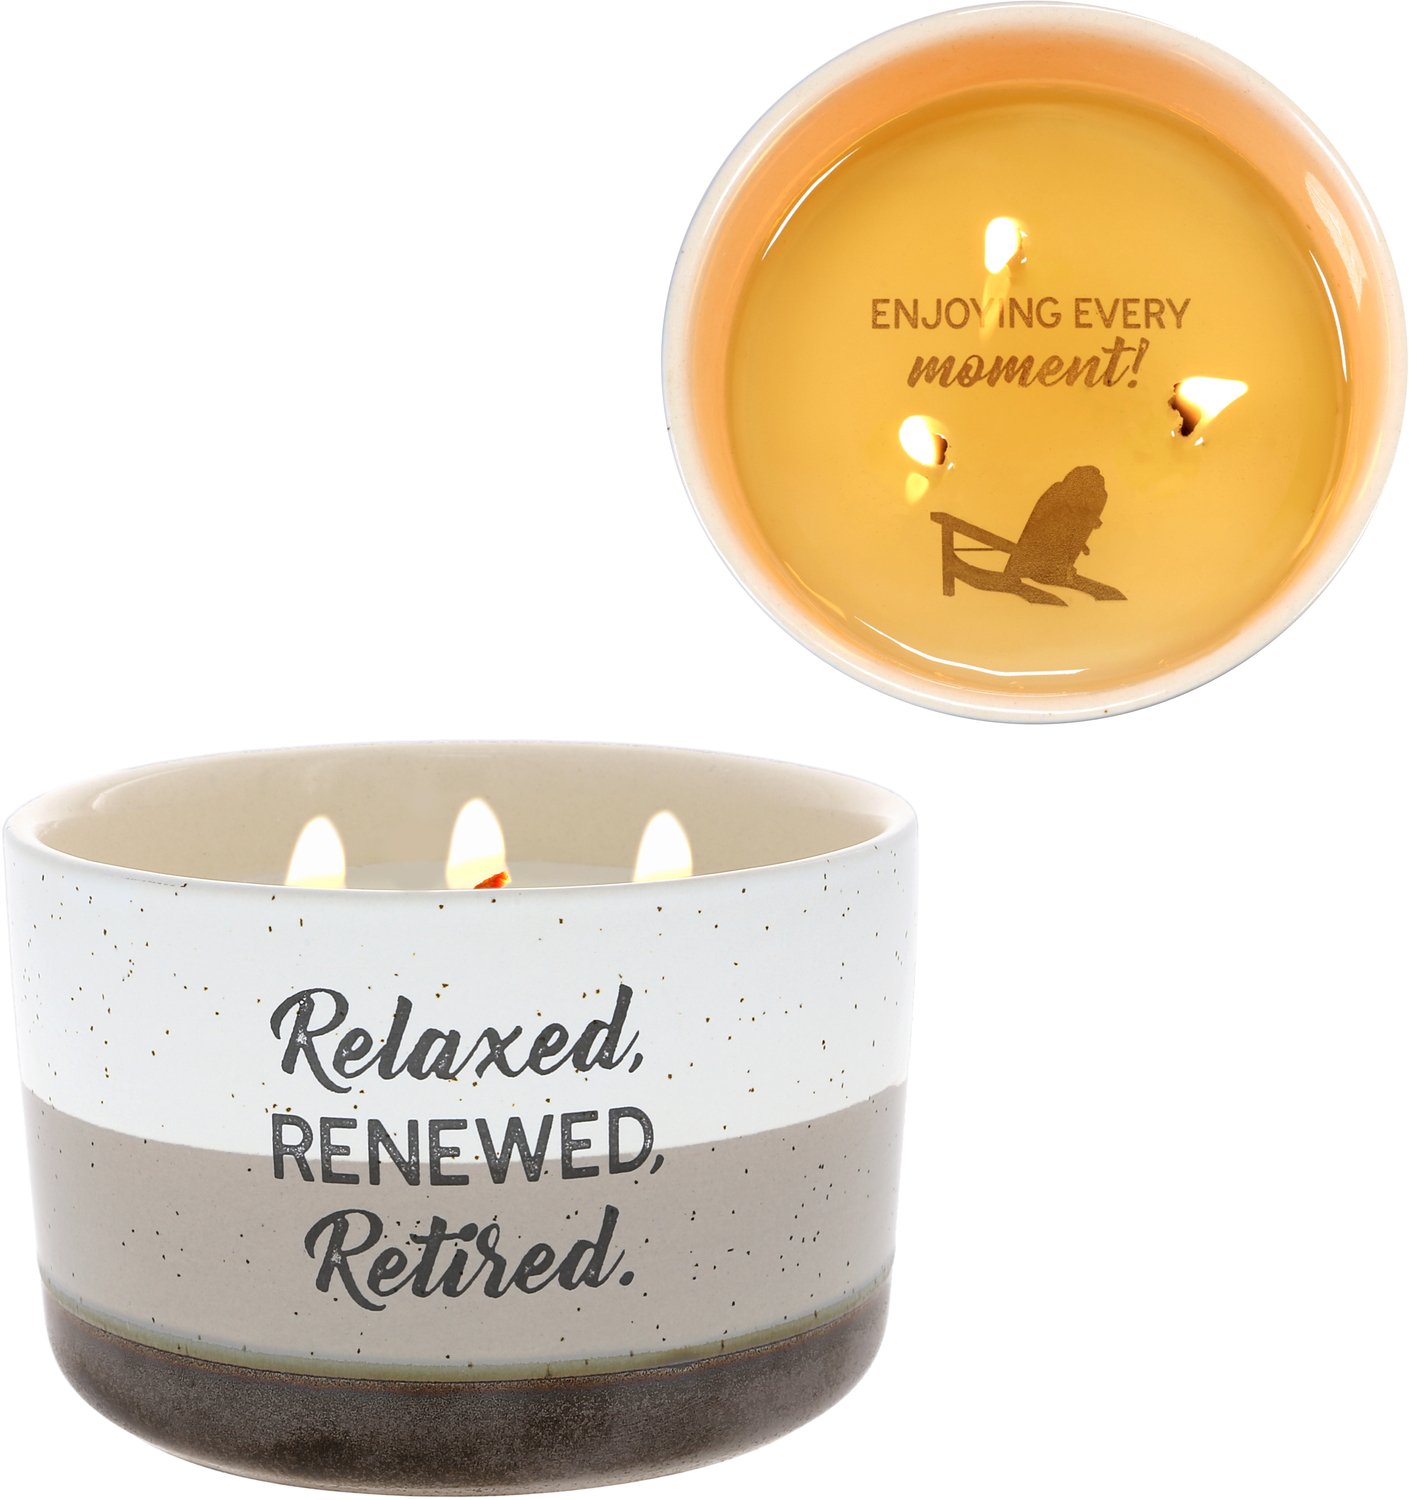 Retired by Retired Life - Retired - 12 oz - 100% Soy Wax Reveal Triple Wick Candle
Scent: Tranquility